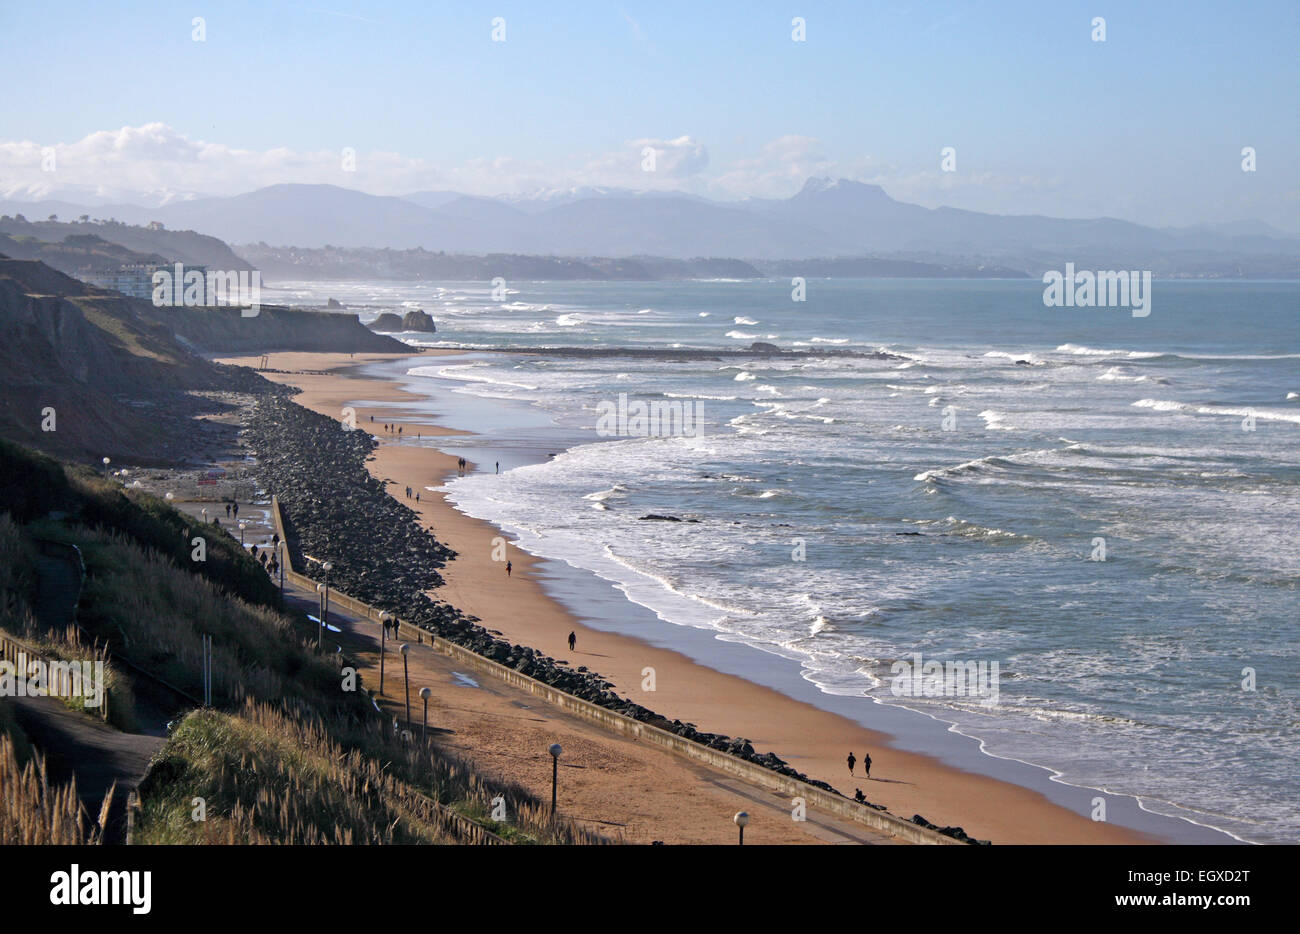 The dramatic coastline of Biarritz, in the Basque region of south-west France. Stock Photo